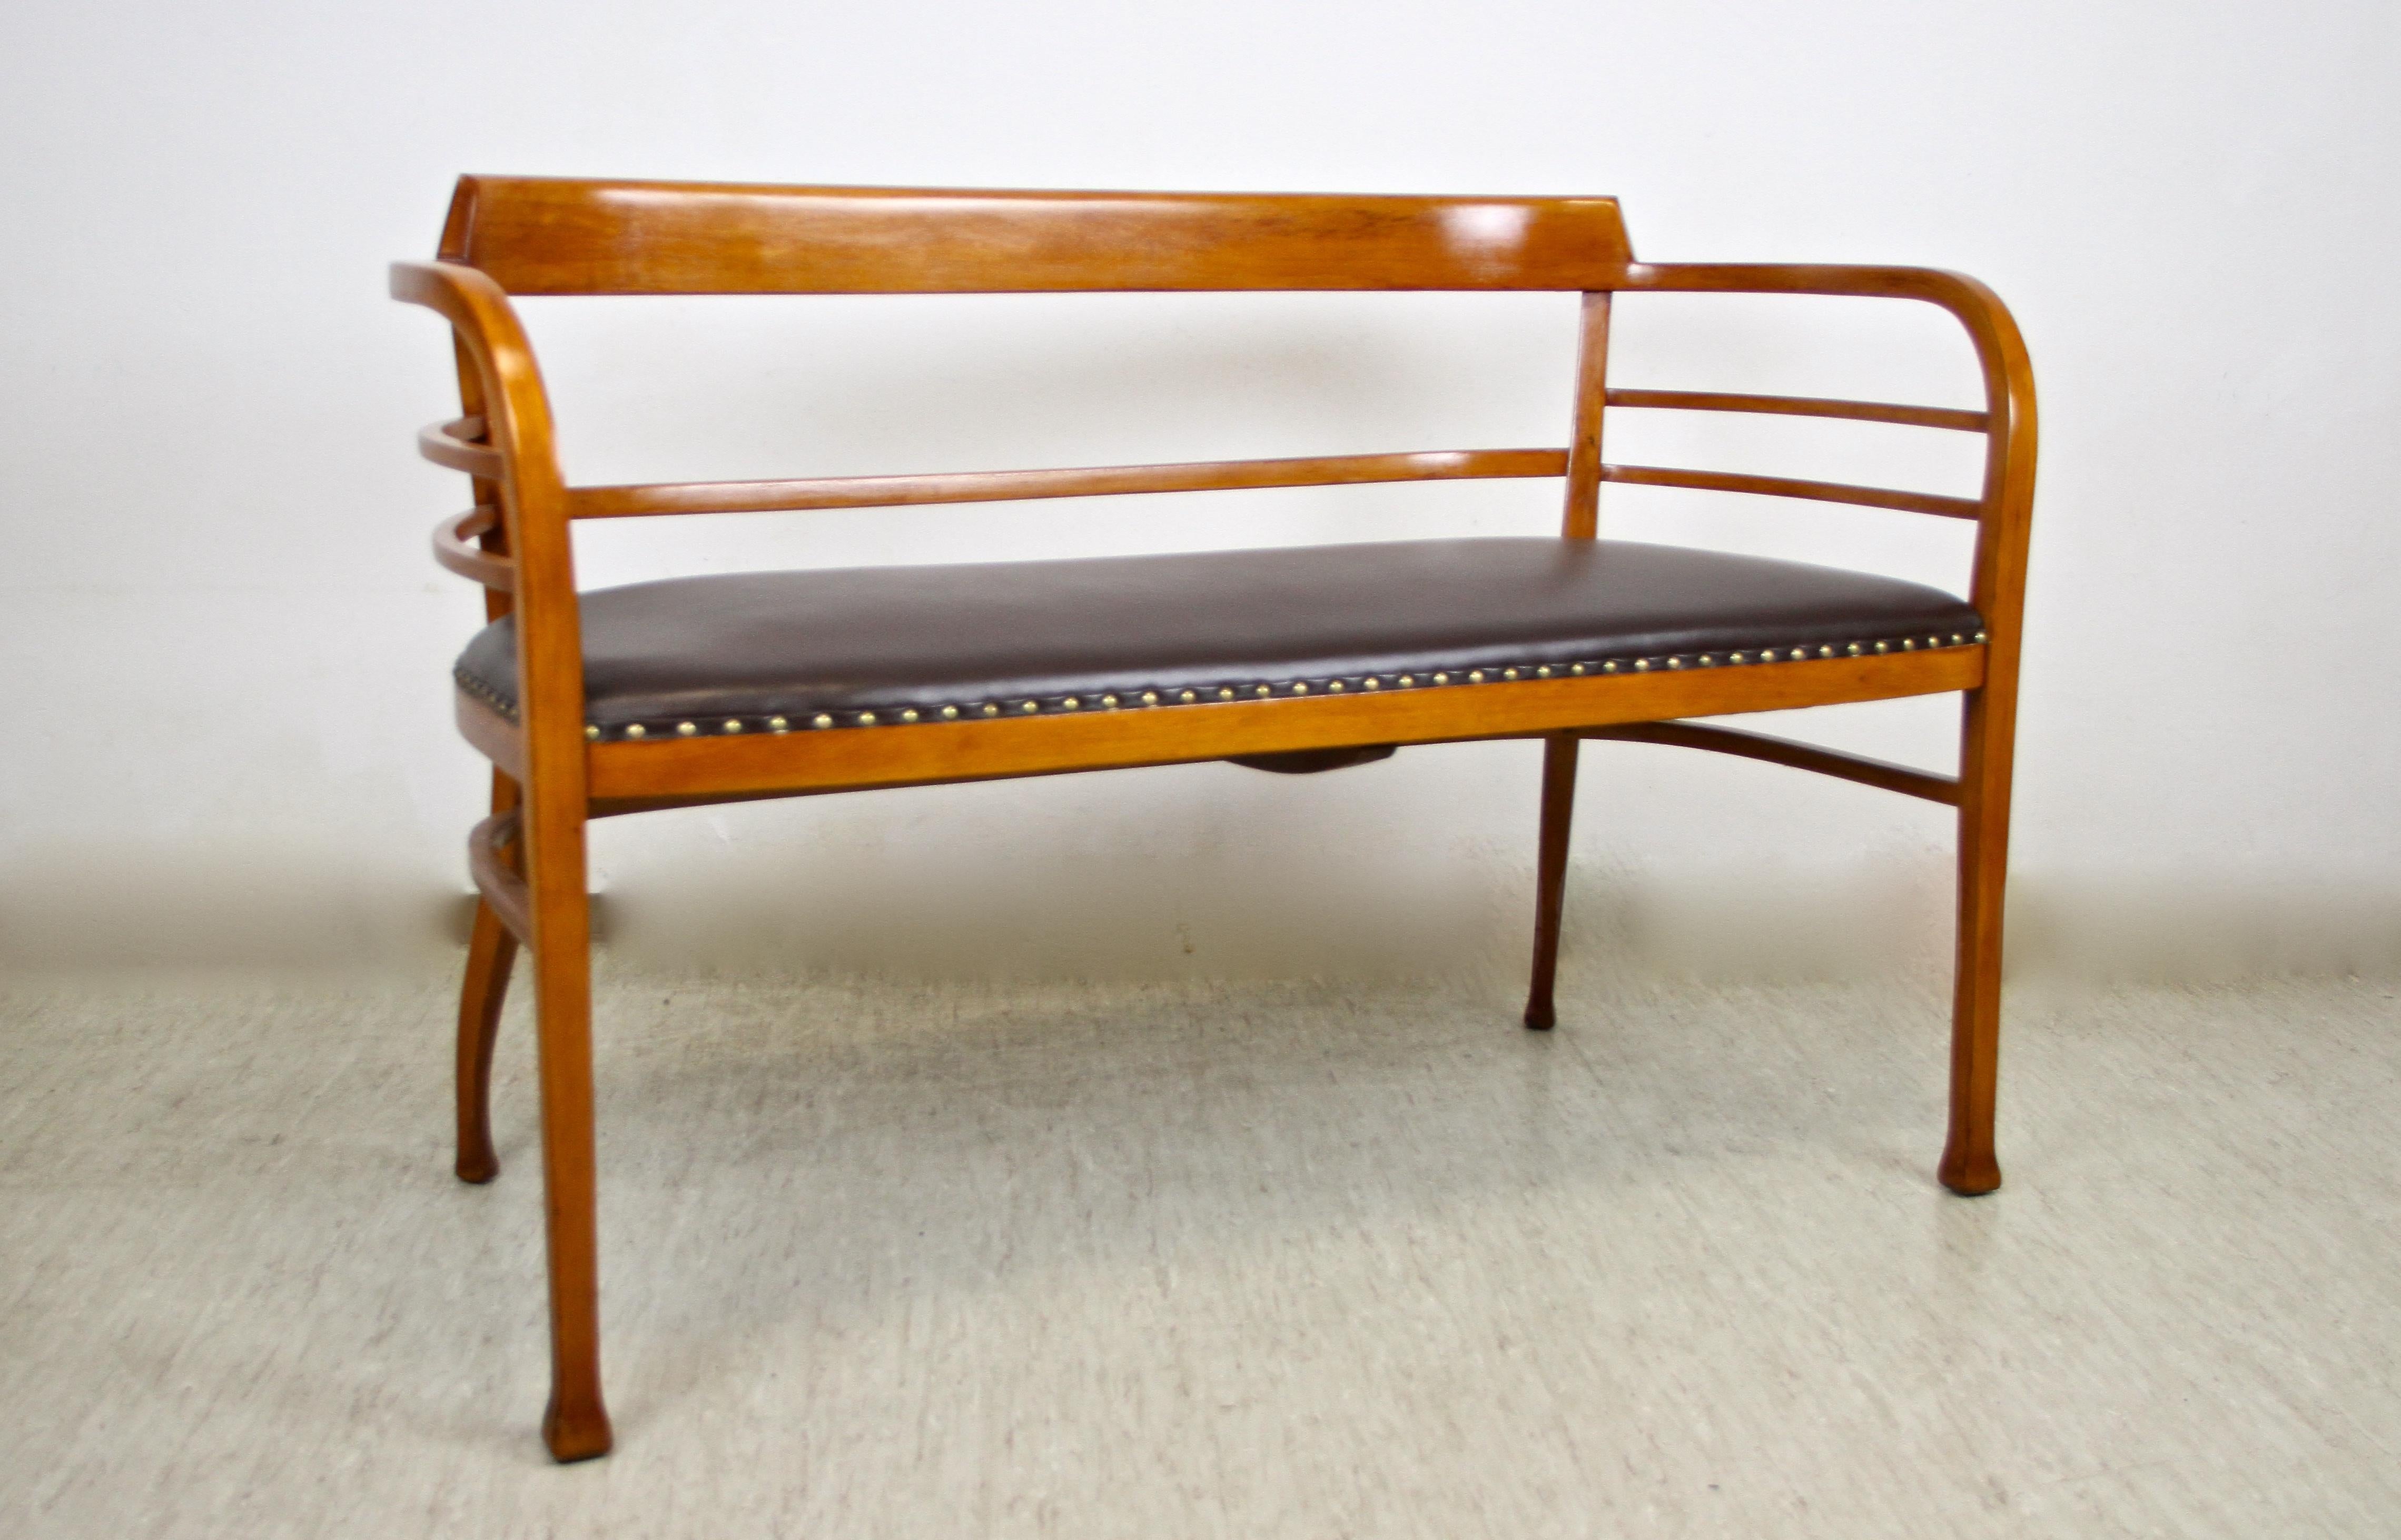 Art Nouveau Thonet Bentwood Bench Attributed To Otto Wagner, Austria, circa 1905